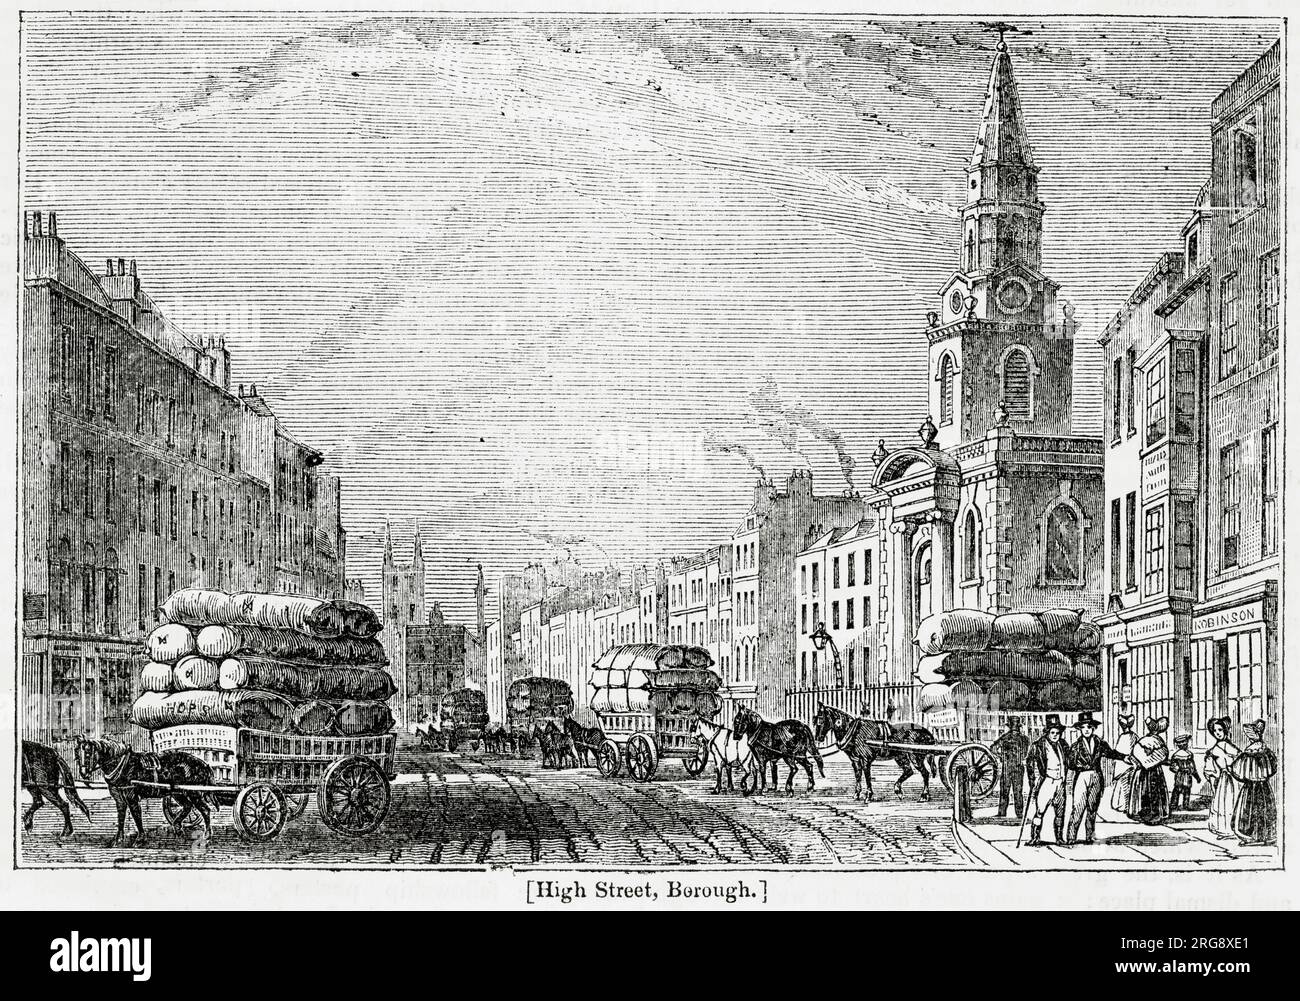 Horses and carriages transport goods along a busy Borough High Street. Stock Photo